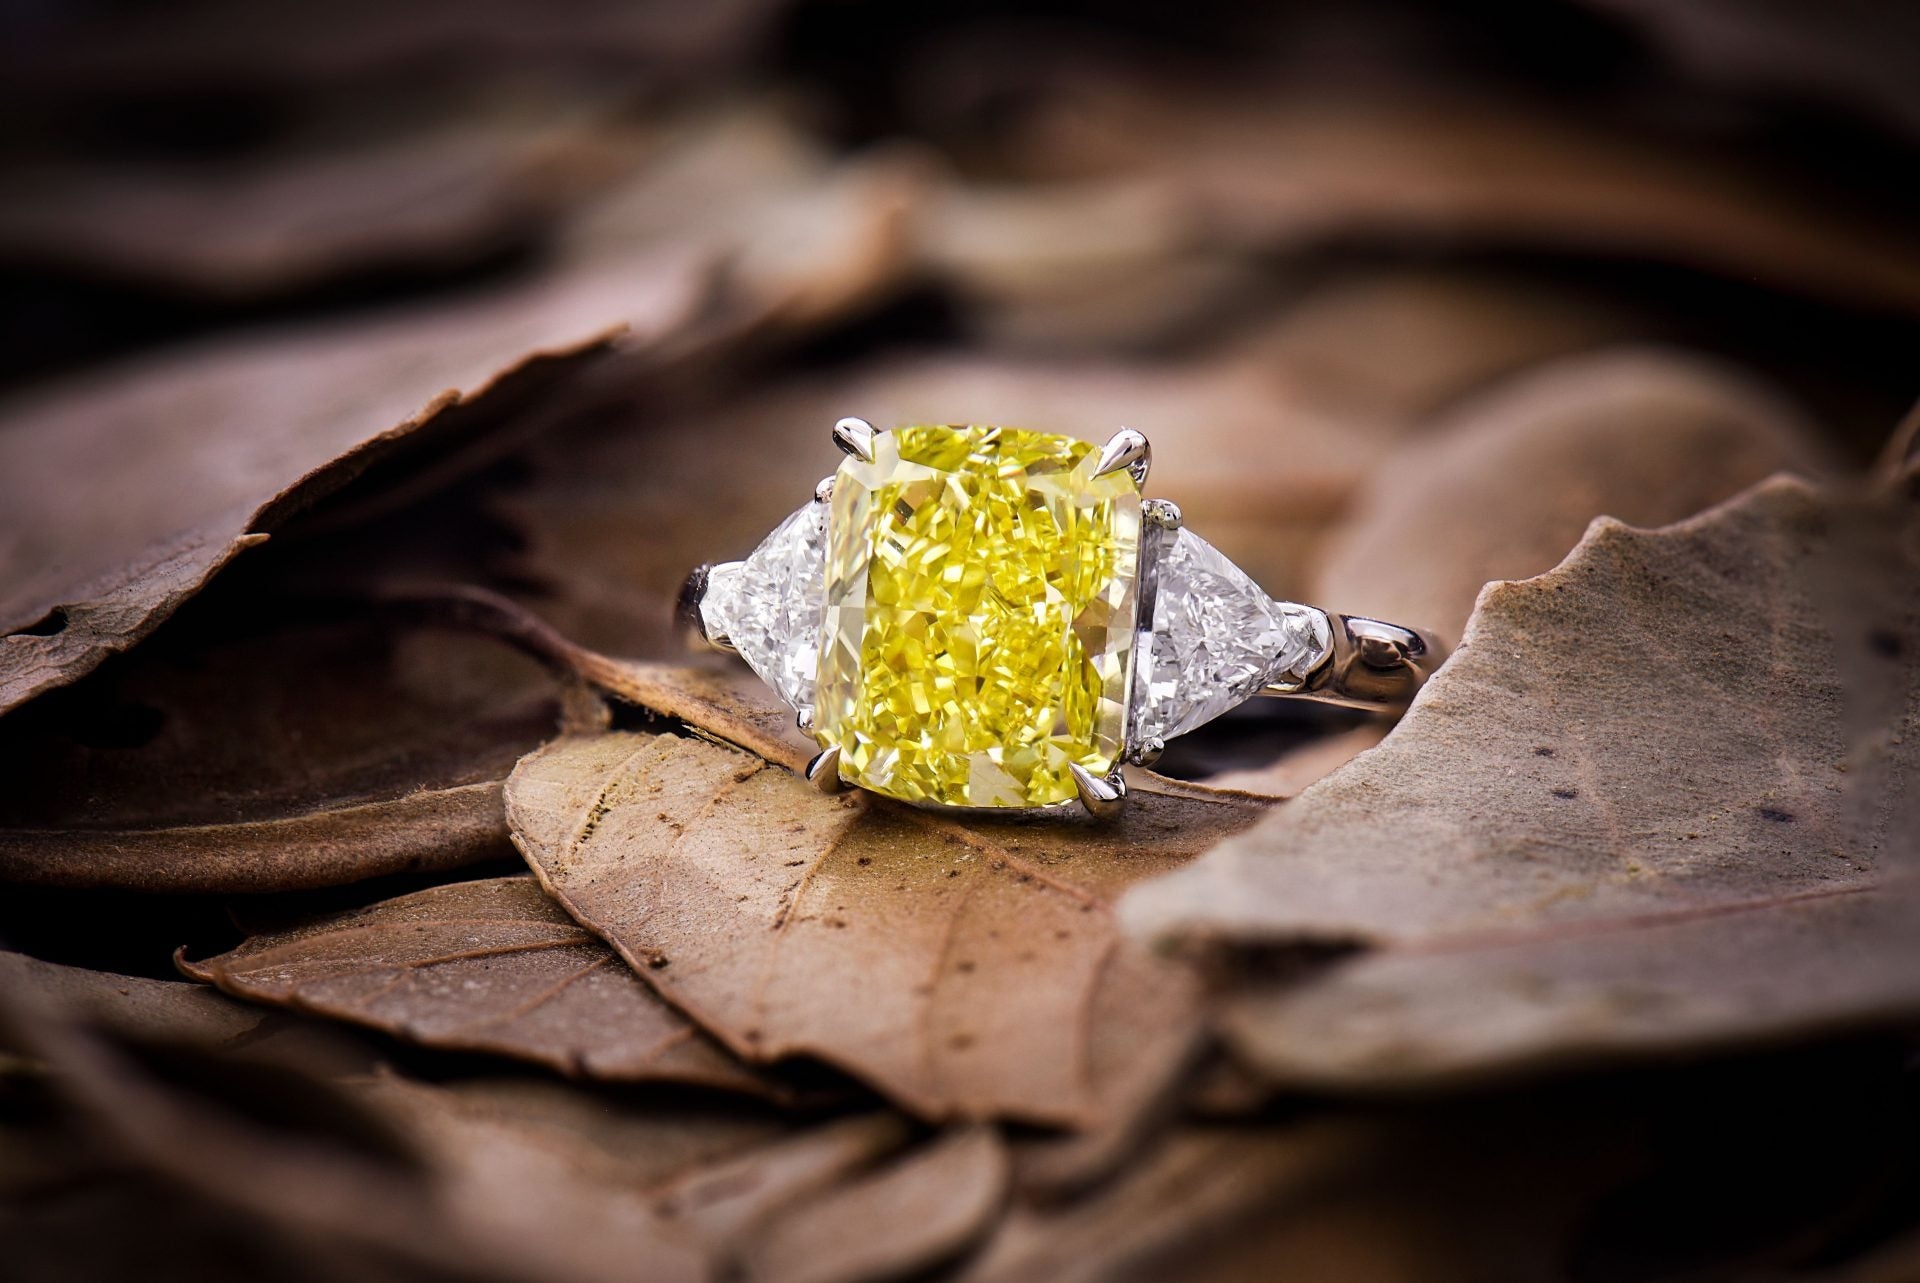 Yellow diamond jewelry, Styling tips, Fashion inspiration, Complementary accessories, 1920x1290 HD Desktop